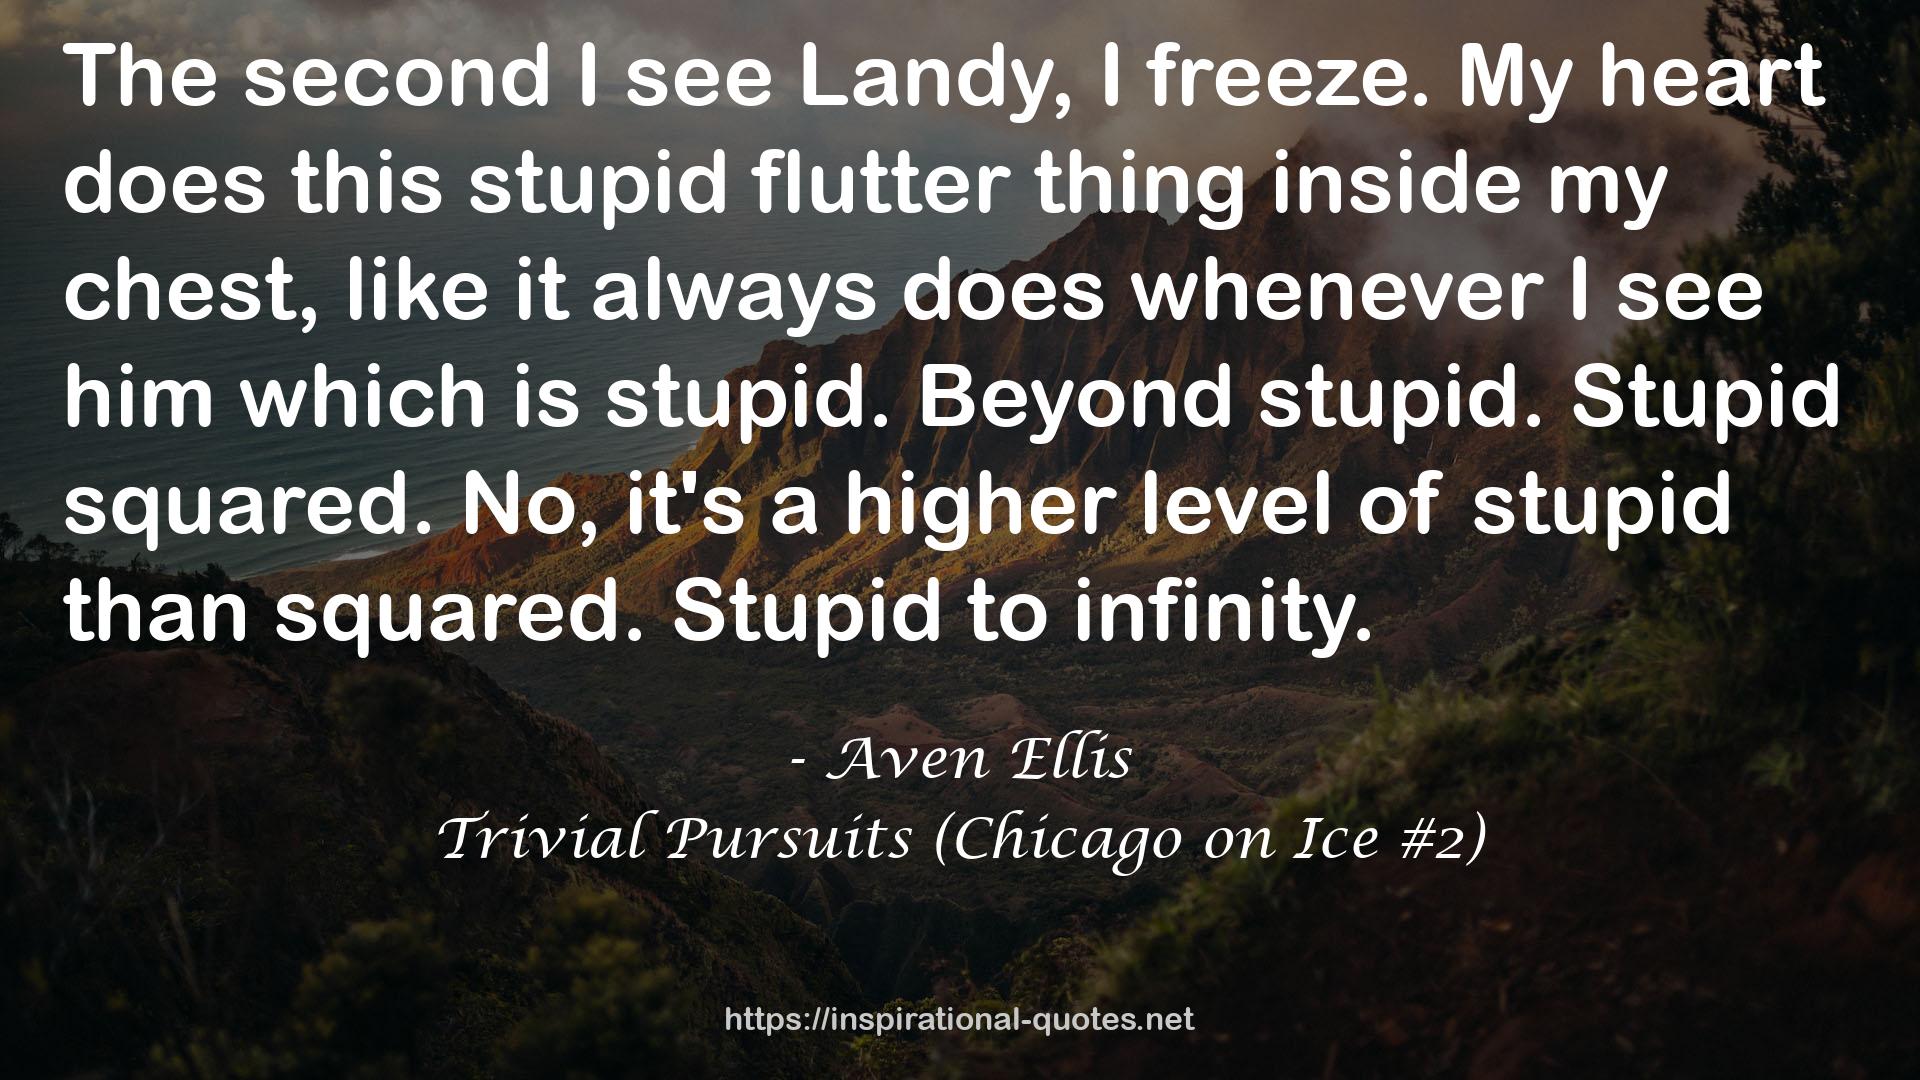 Trivial Pursuits (Chicago on Ice #2) QUOTES